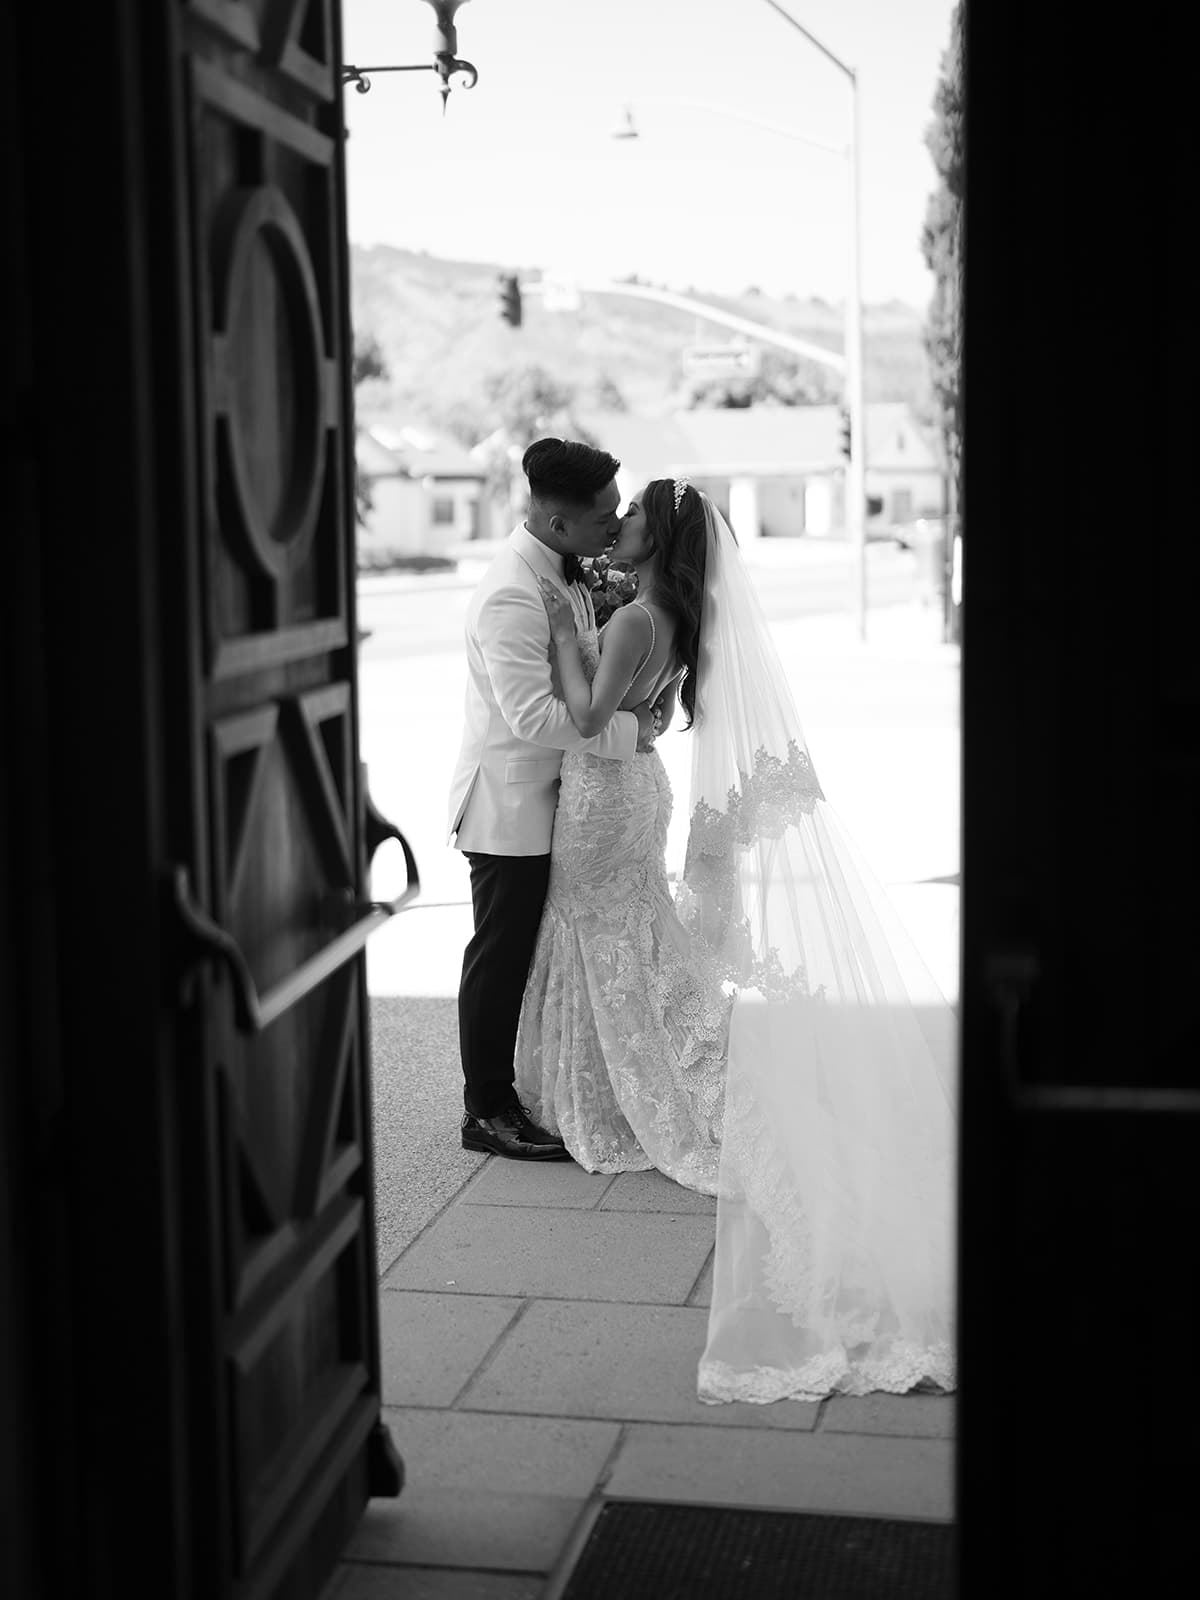 Black and white photo of a bride and groom taken through a doorway at Casa Romantica